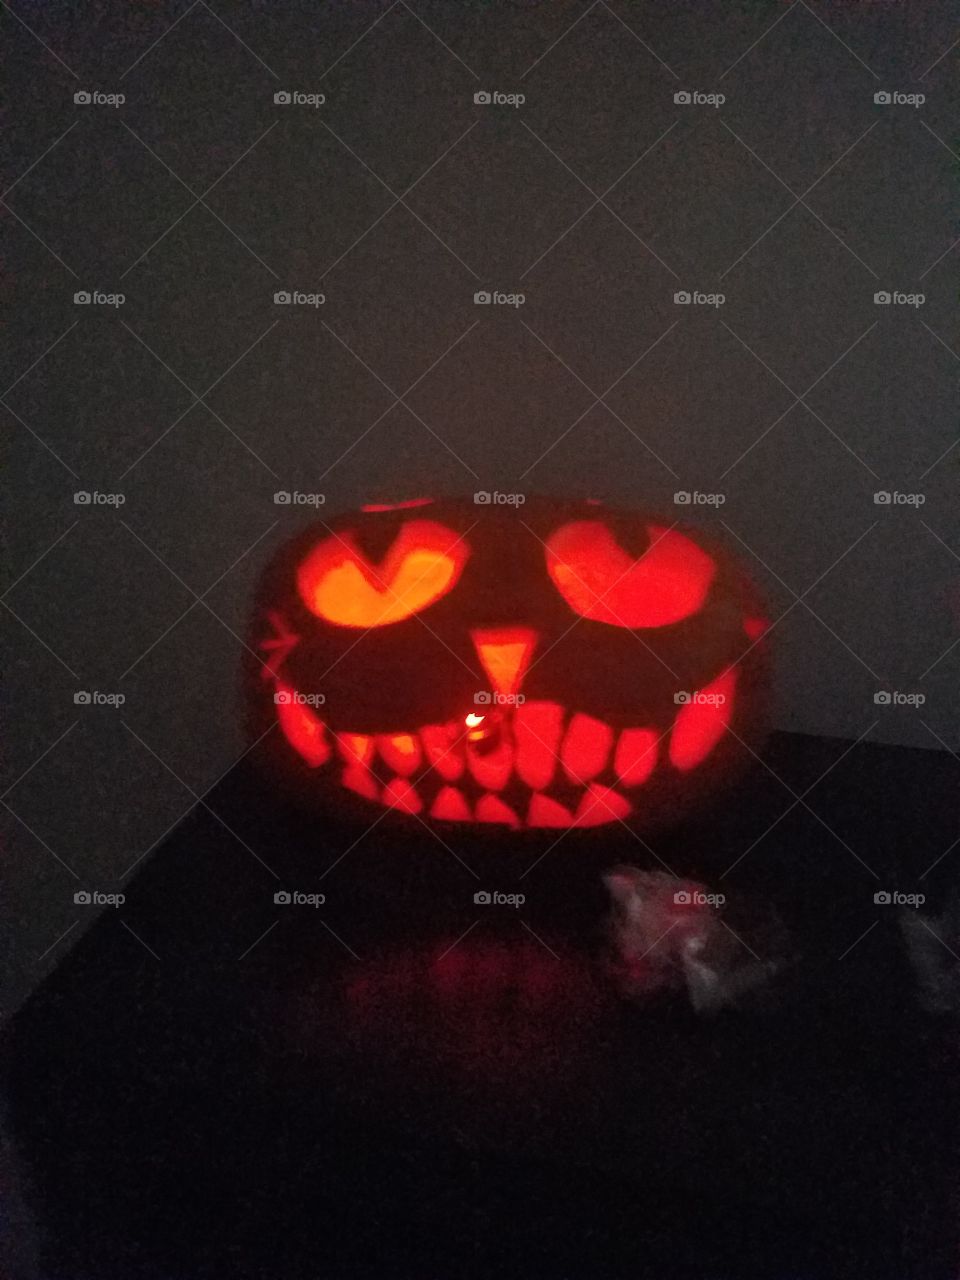 Cheshire cat carved into pumpkin